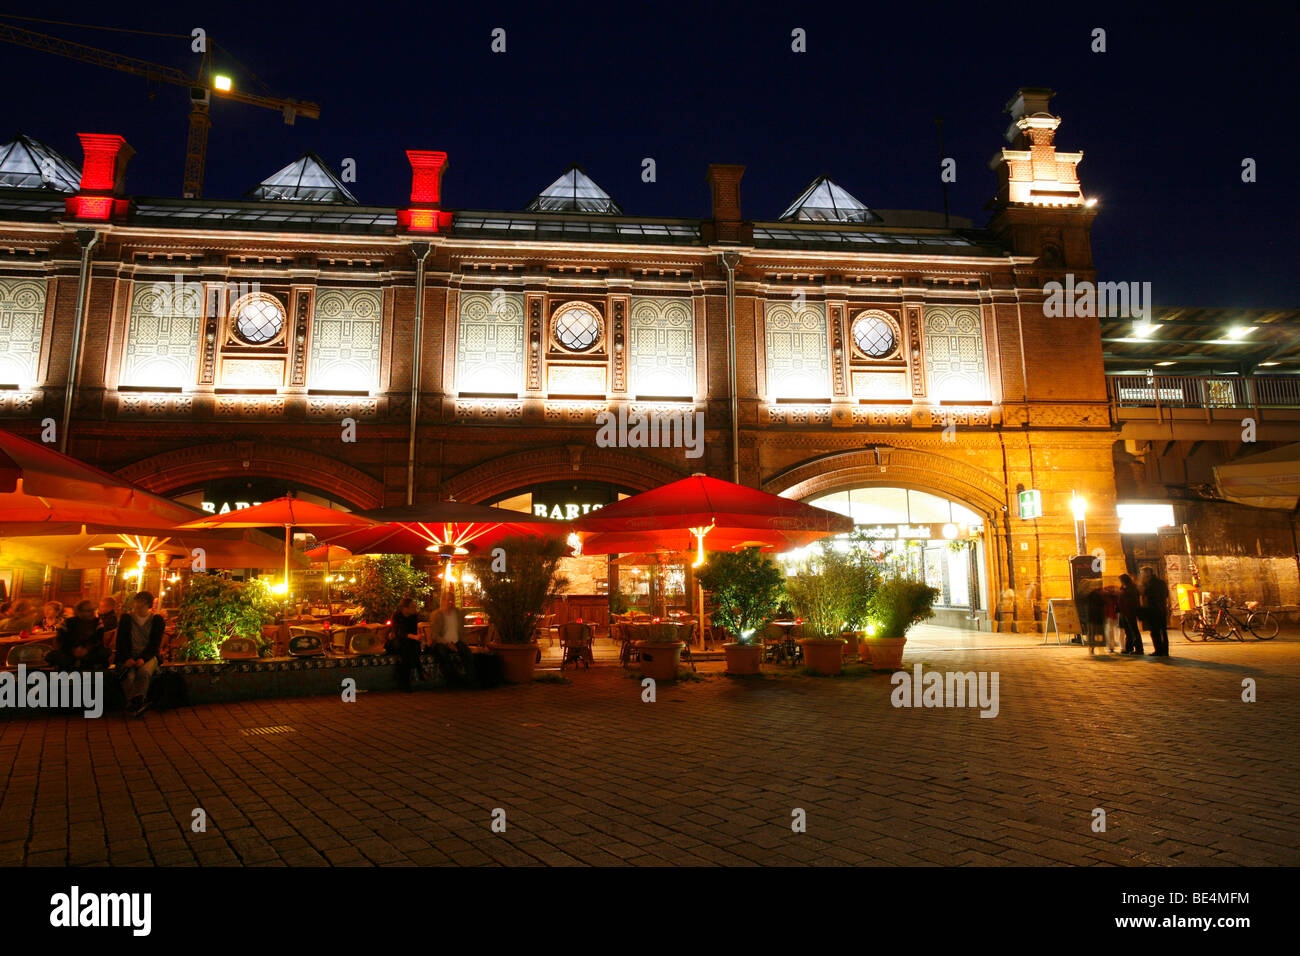 S-Bahnhof Hackescher Markt station with restaurants with outdoor seating at night, Mitte, Berlin, Germany, Europe Stock Photo